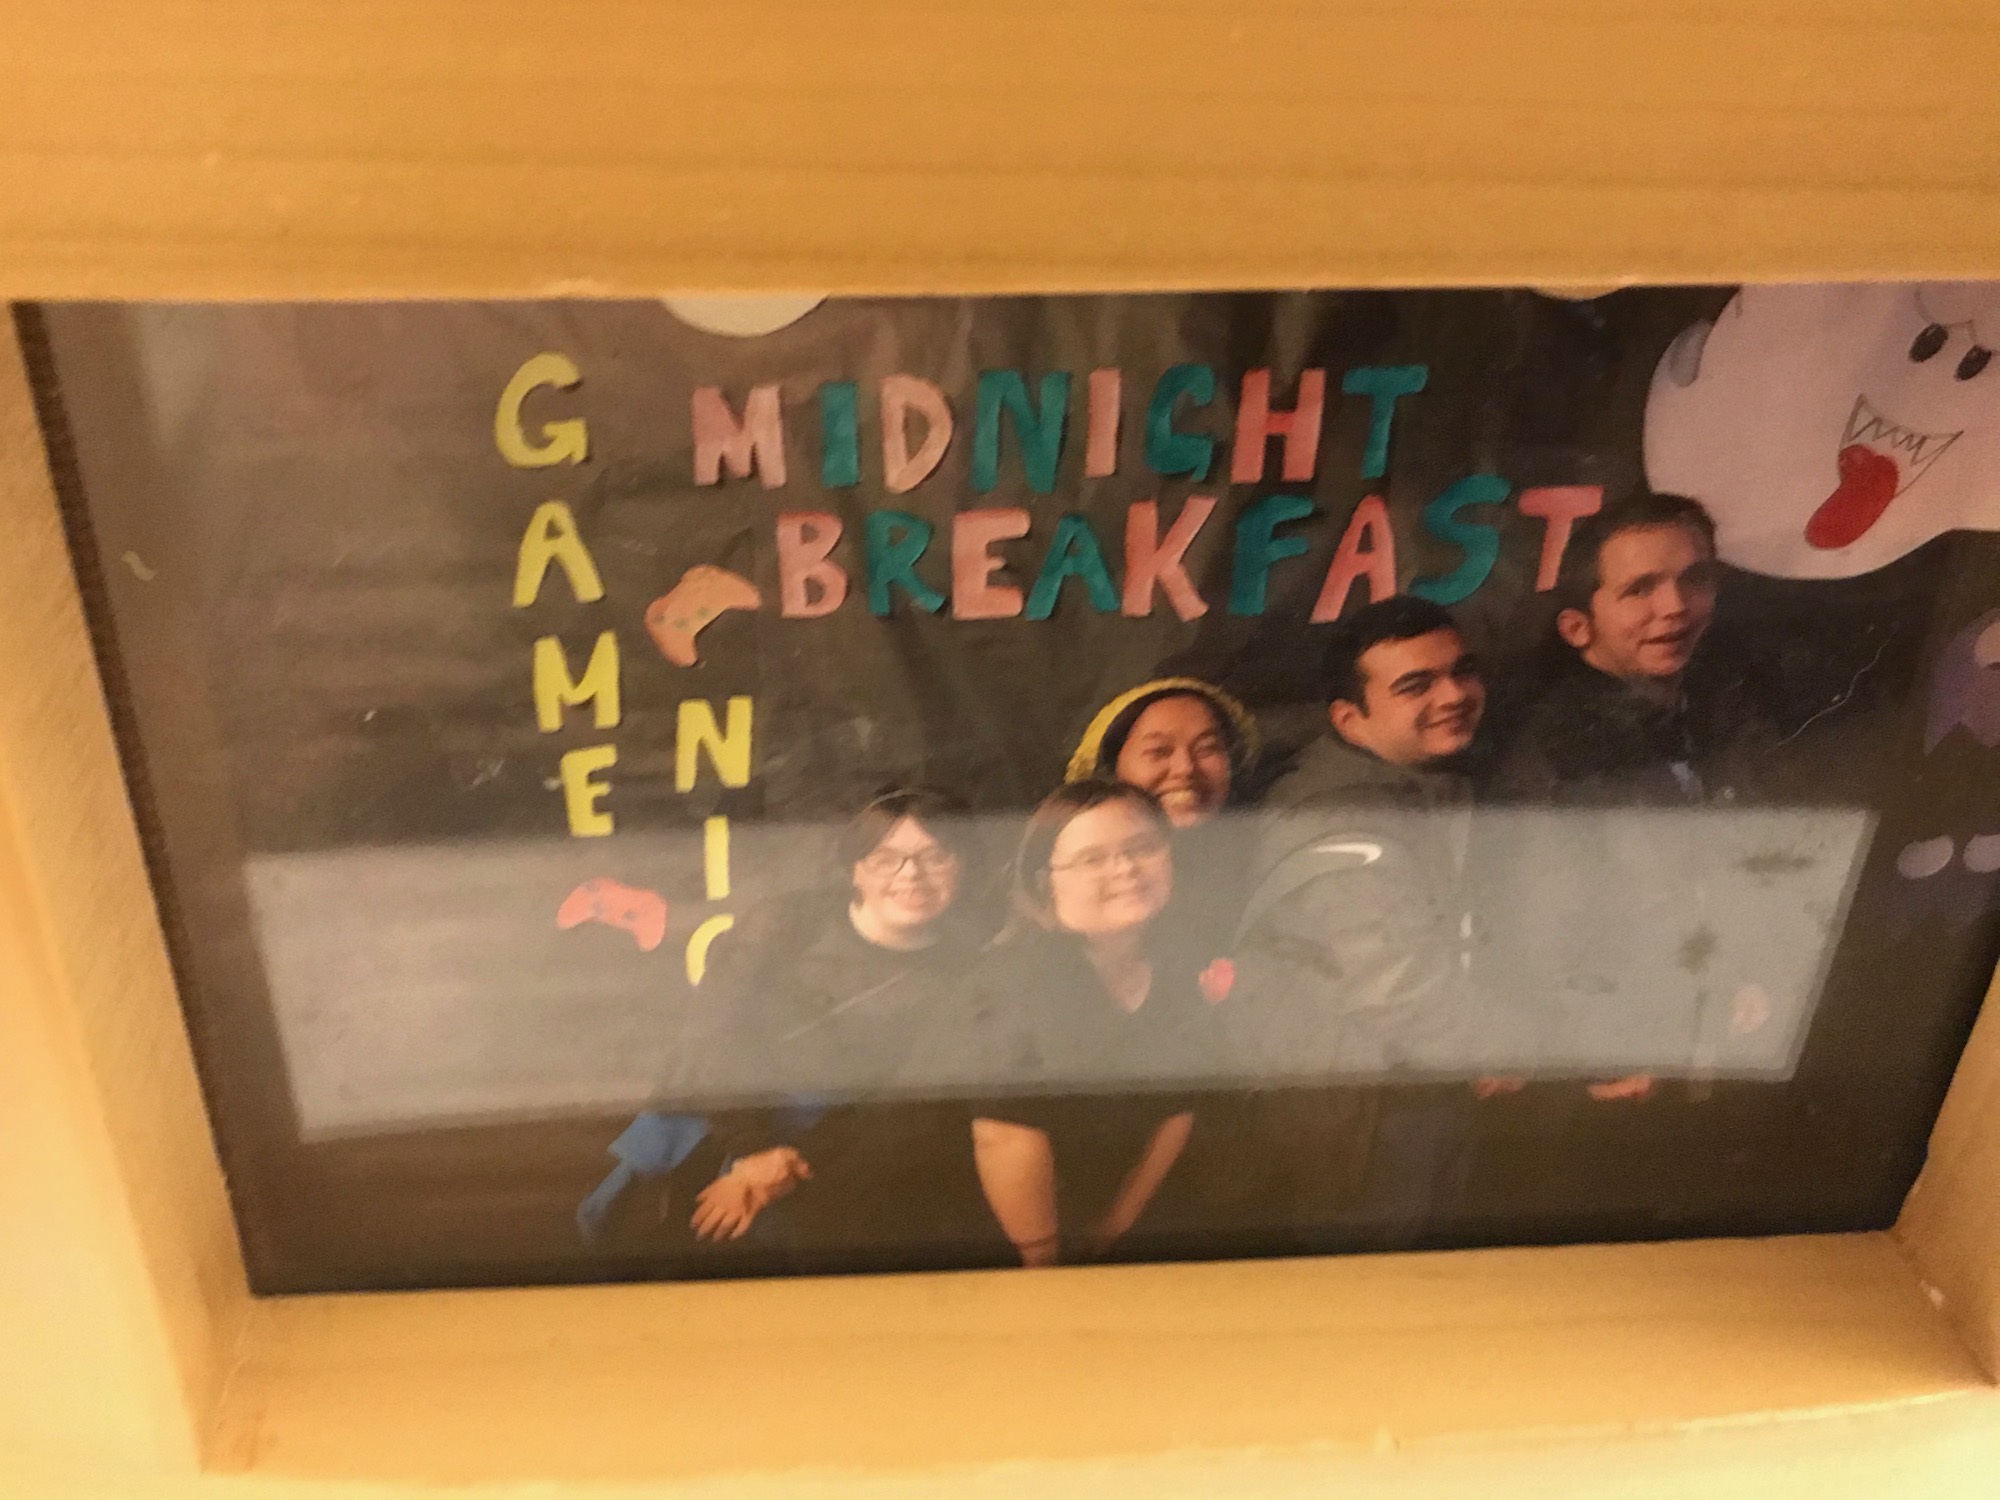 The image is of a framed memory from Midnight Breakfast.